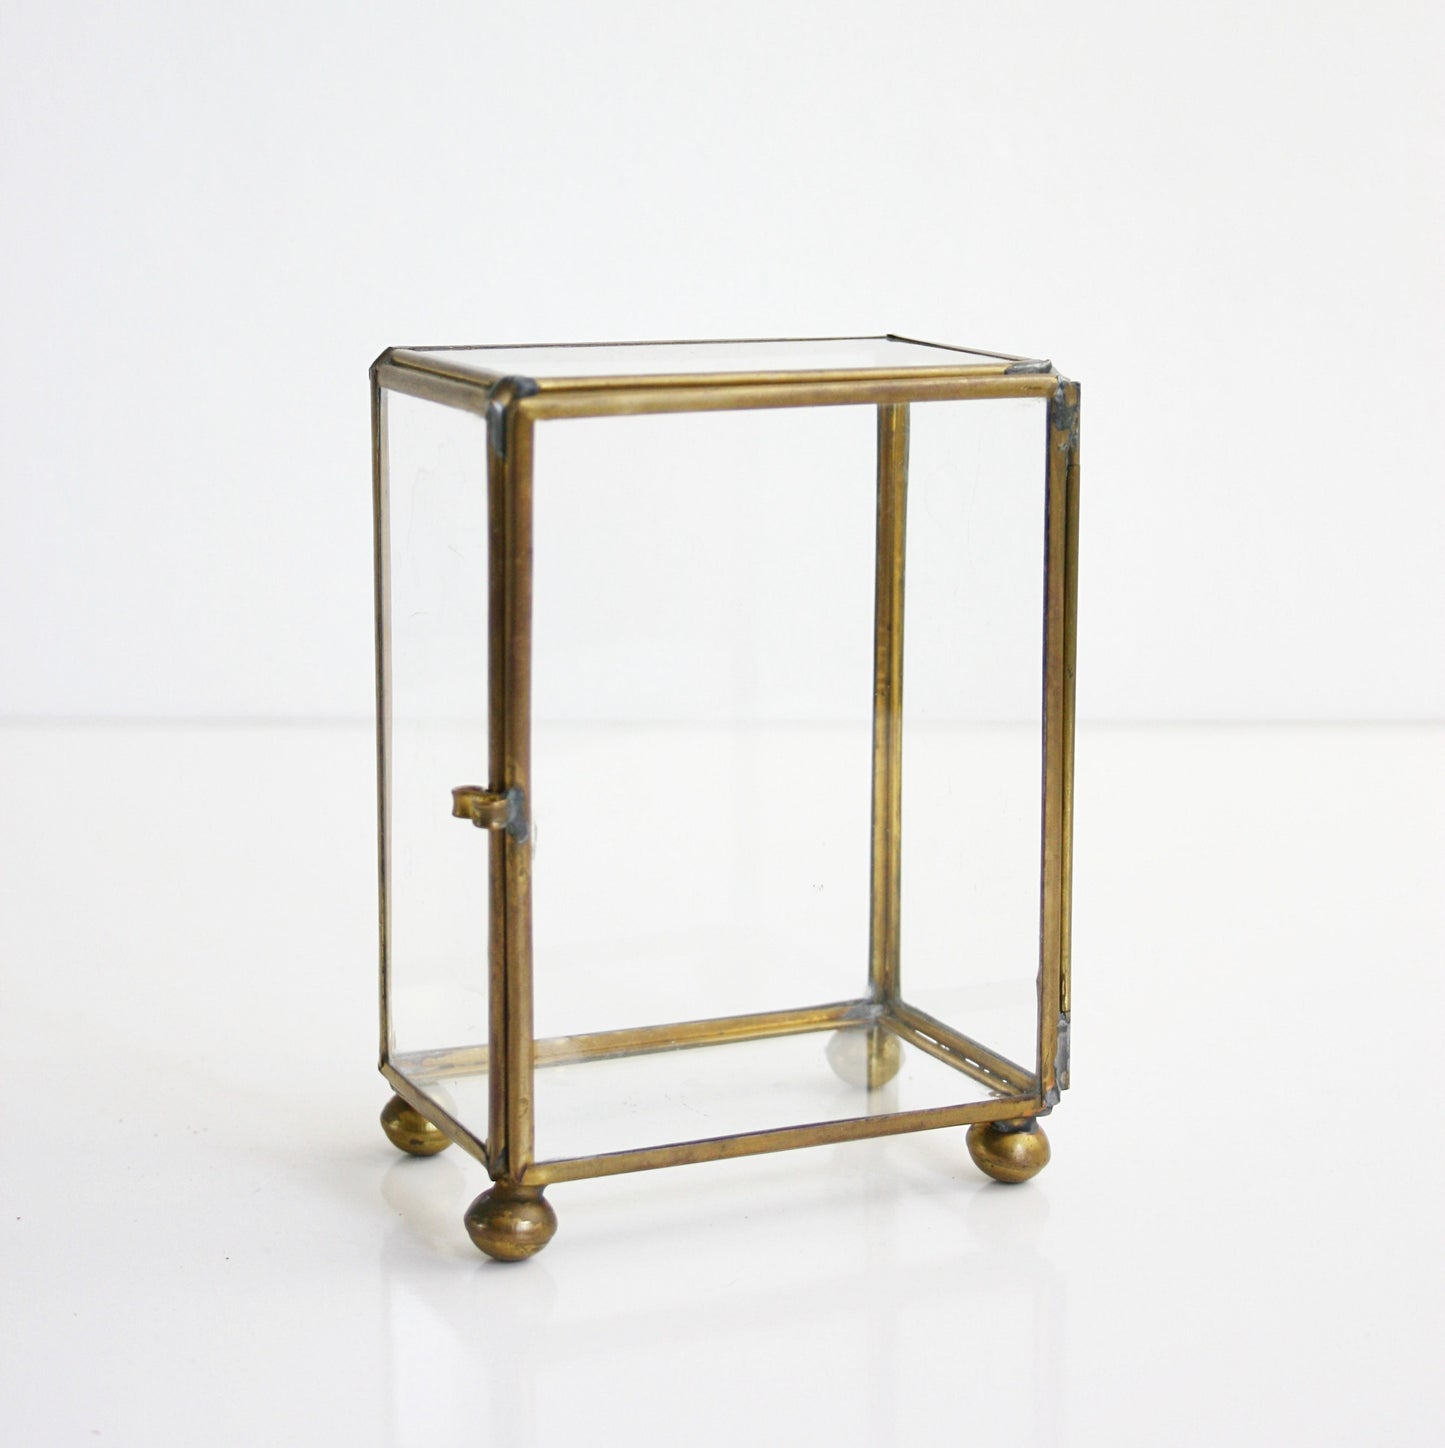 SOLD - Vintage Glass and Brass Curio Box / Mid Century Display or Terrarium